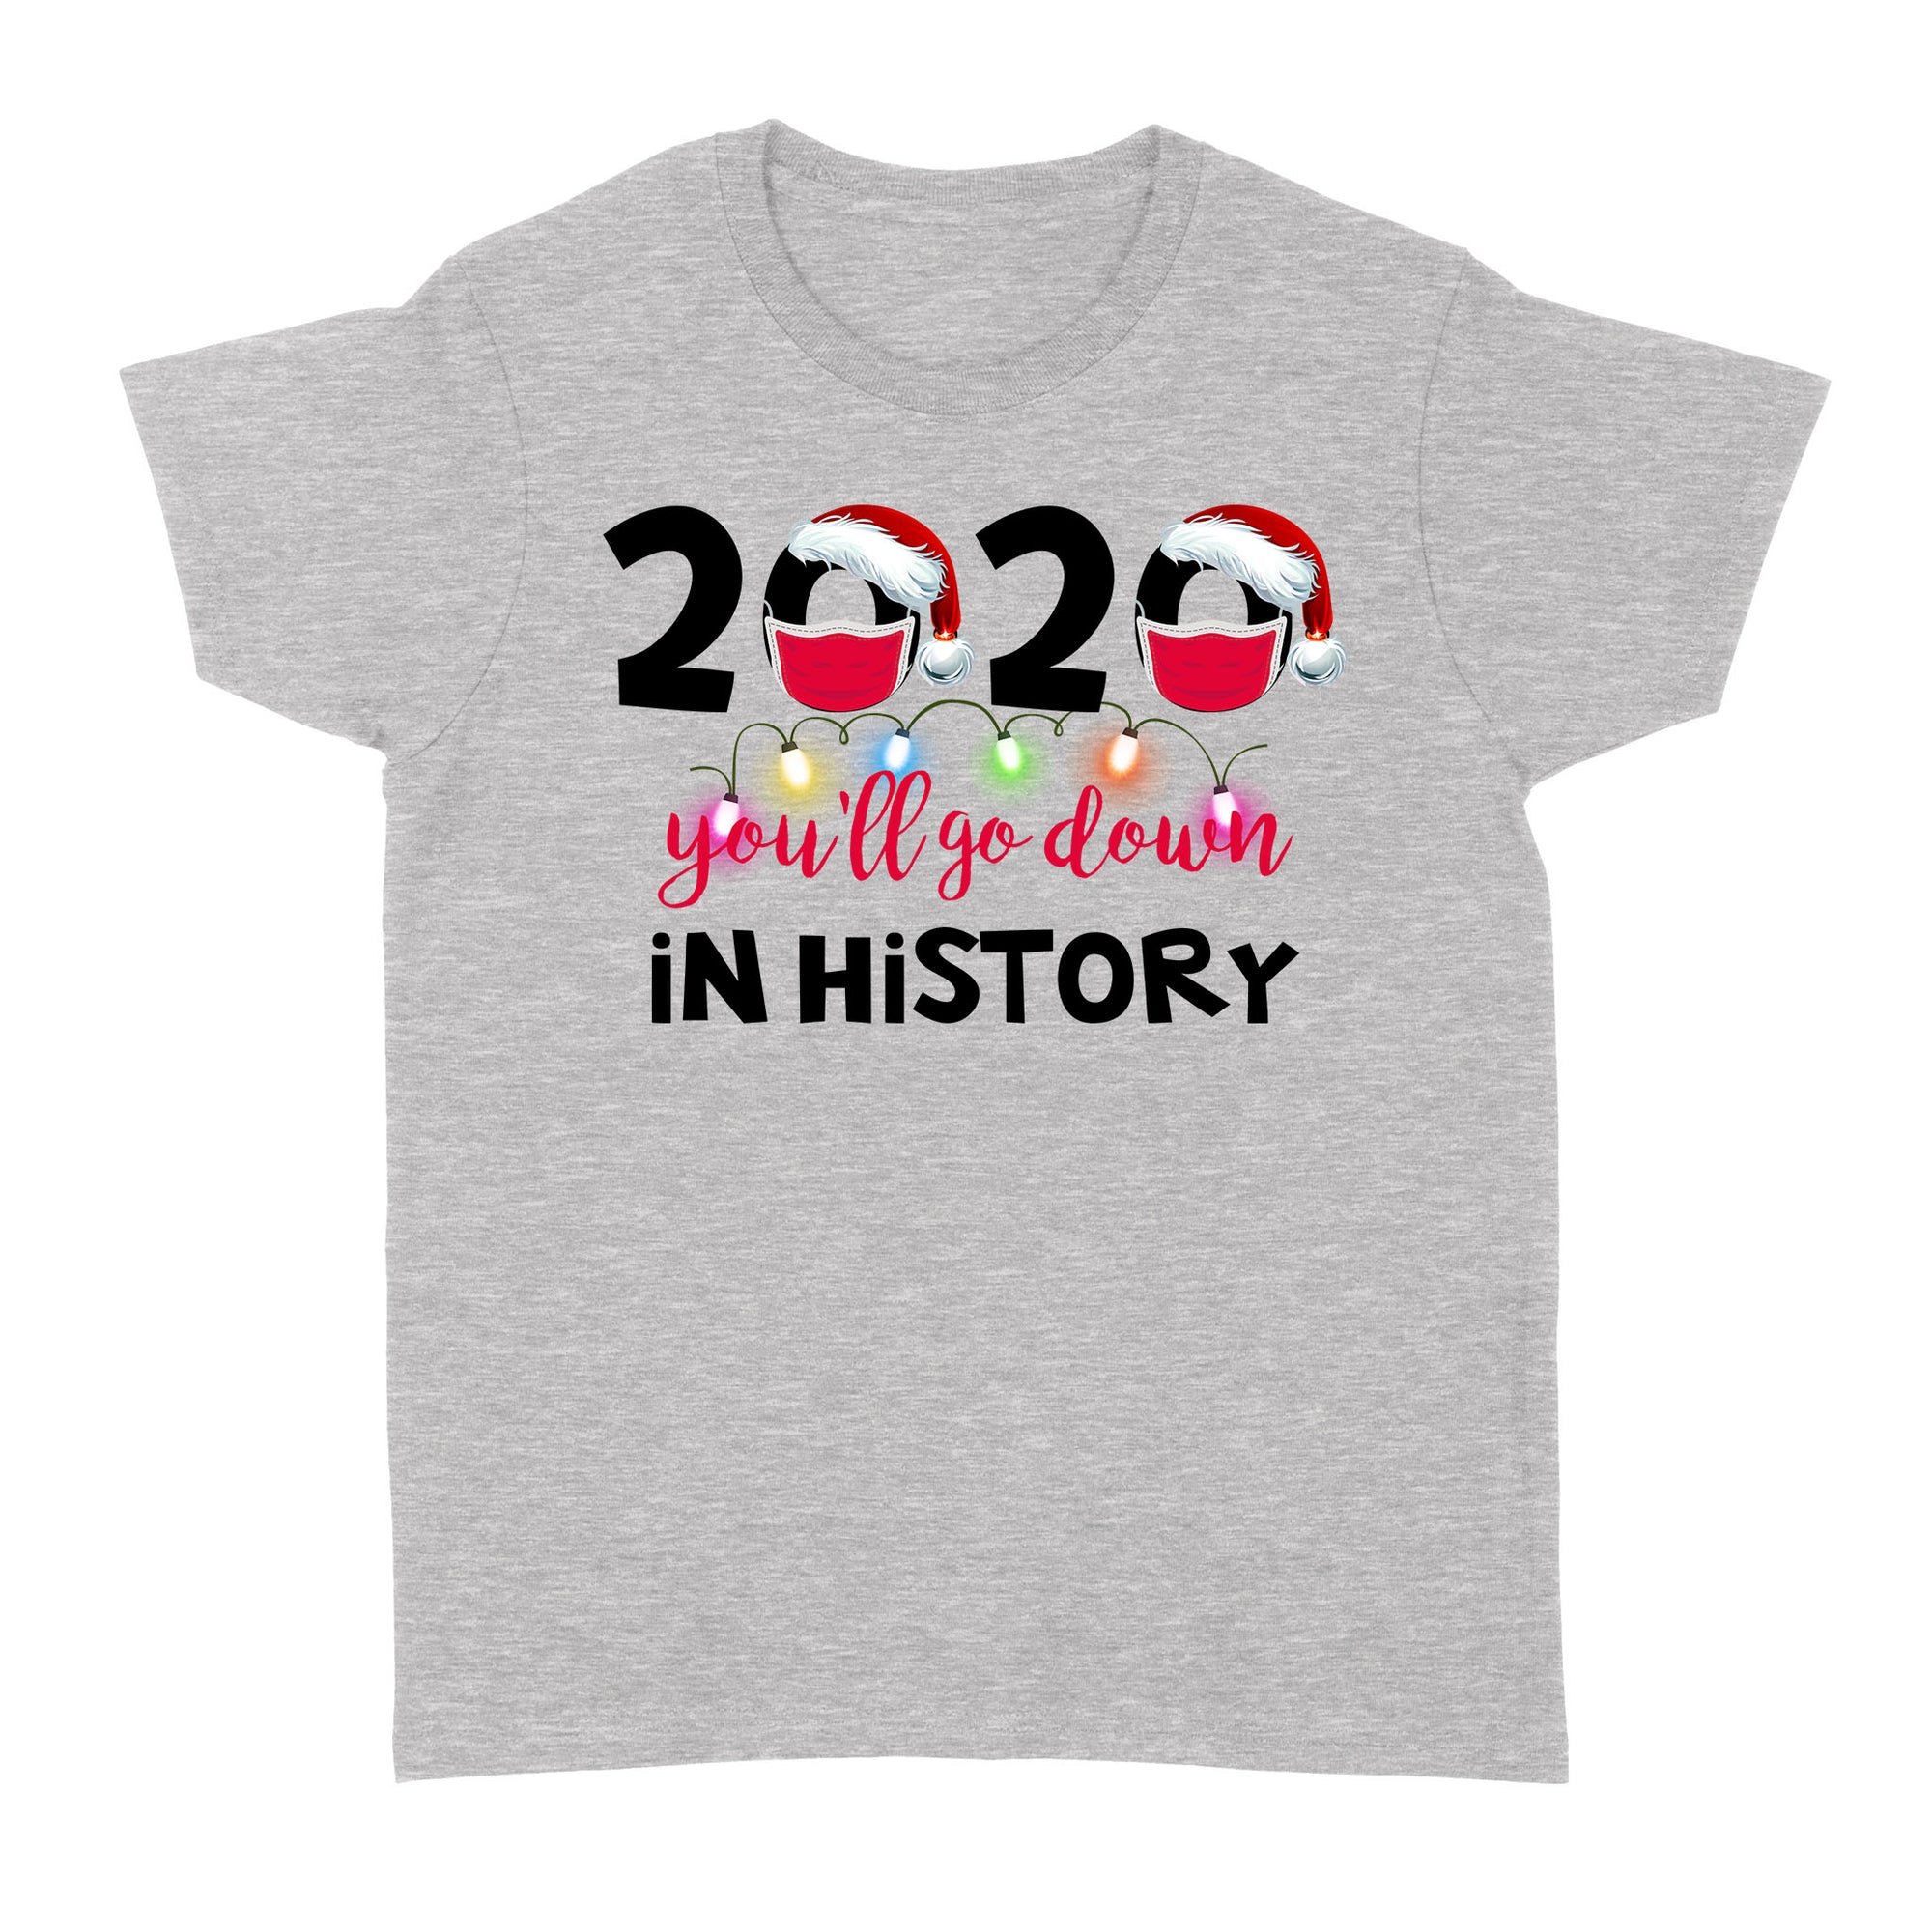 2020 You Will Go Down In History Funny Christmas Gift Ideas for Him Her Women Men Dad Mom - Standard Women's T-shirt